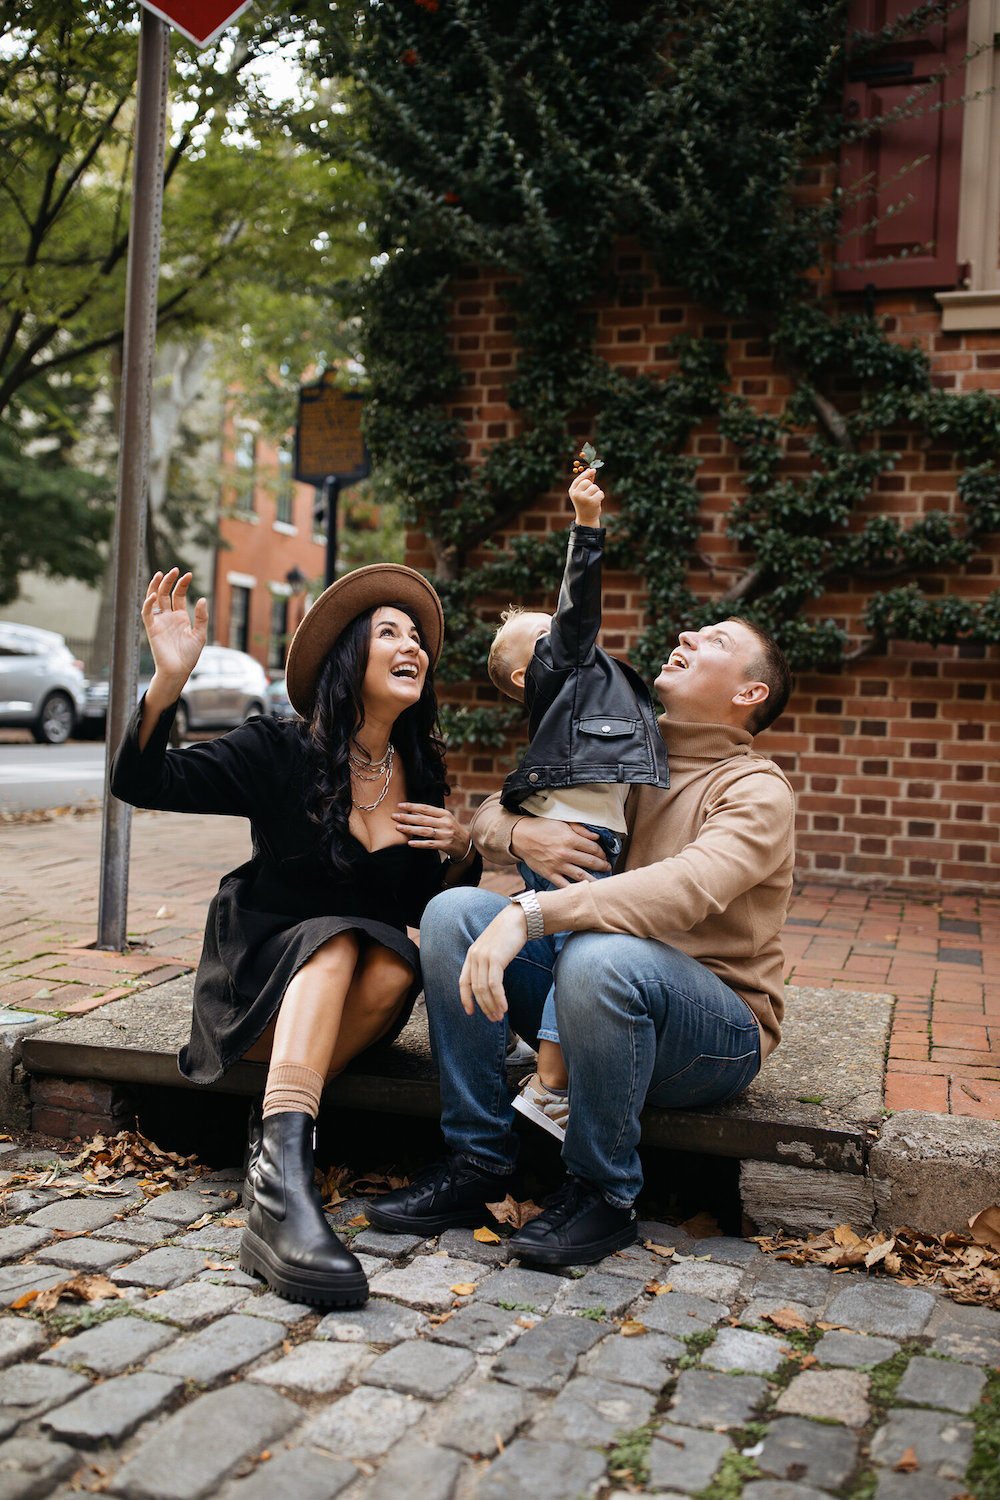 image of a family with a man, woman, and small child sitting on a sidewalk in front of a brick building in the fall wearing black, tan, and denim